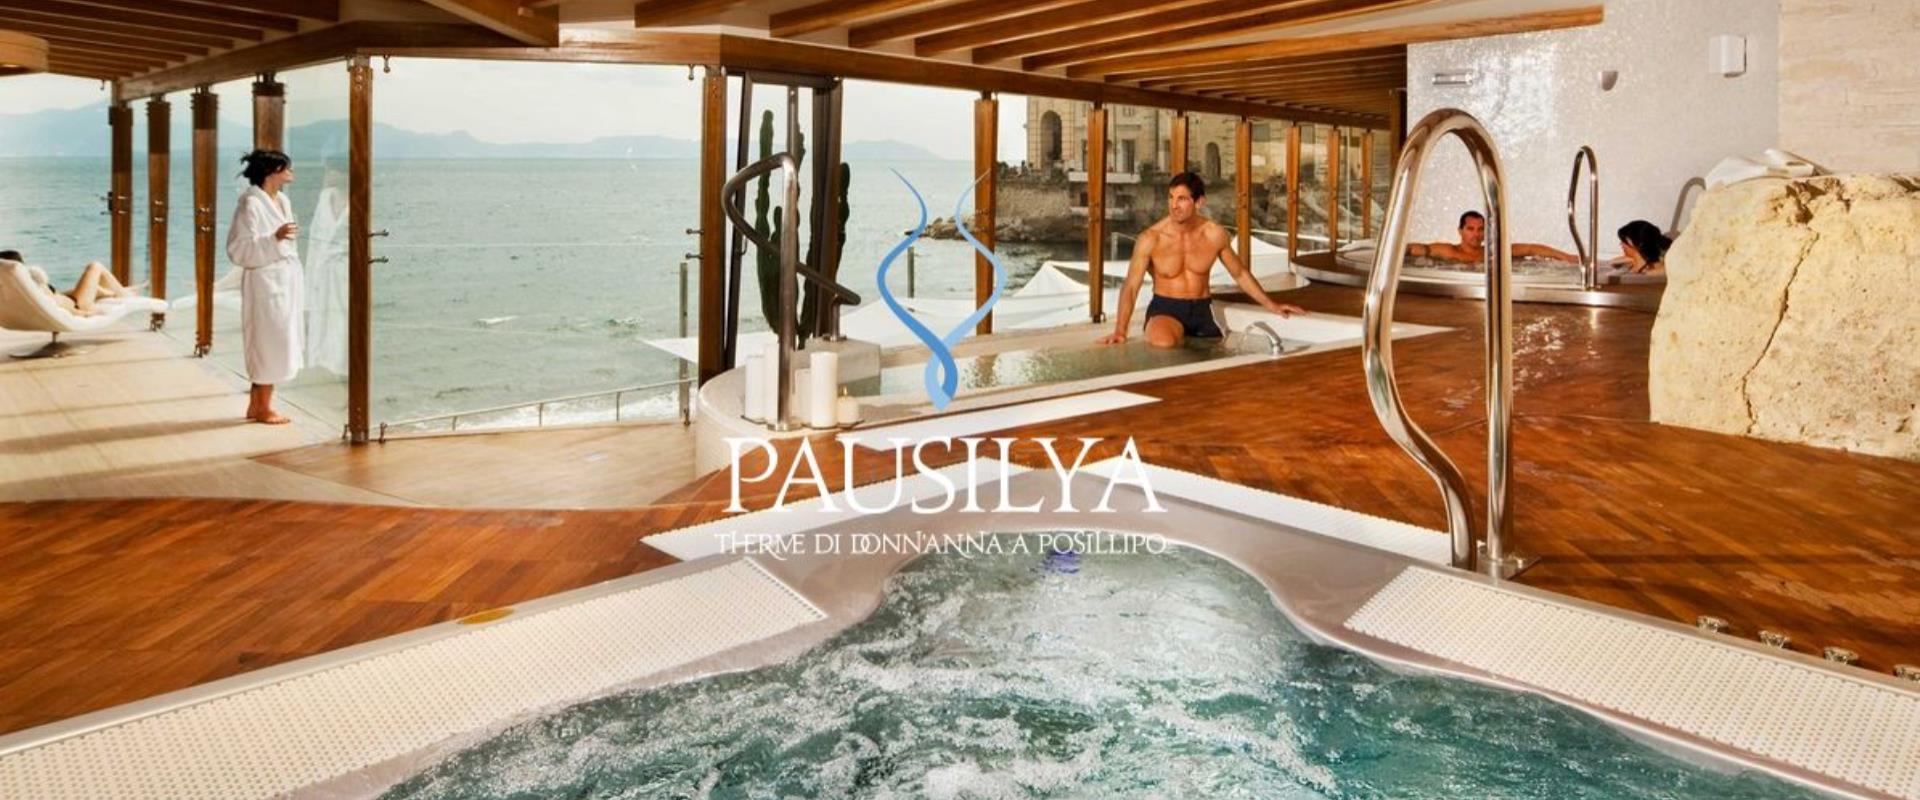 Discover the SPA Pausilya an arrangement withBW Signature Collection Hotel Paradiso: any treatment for the well-being of your body!